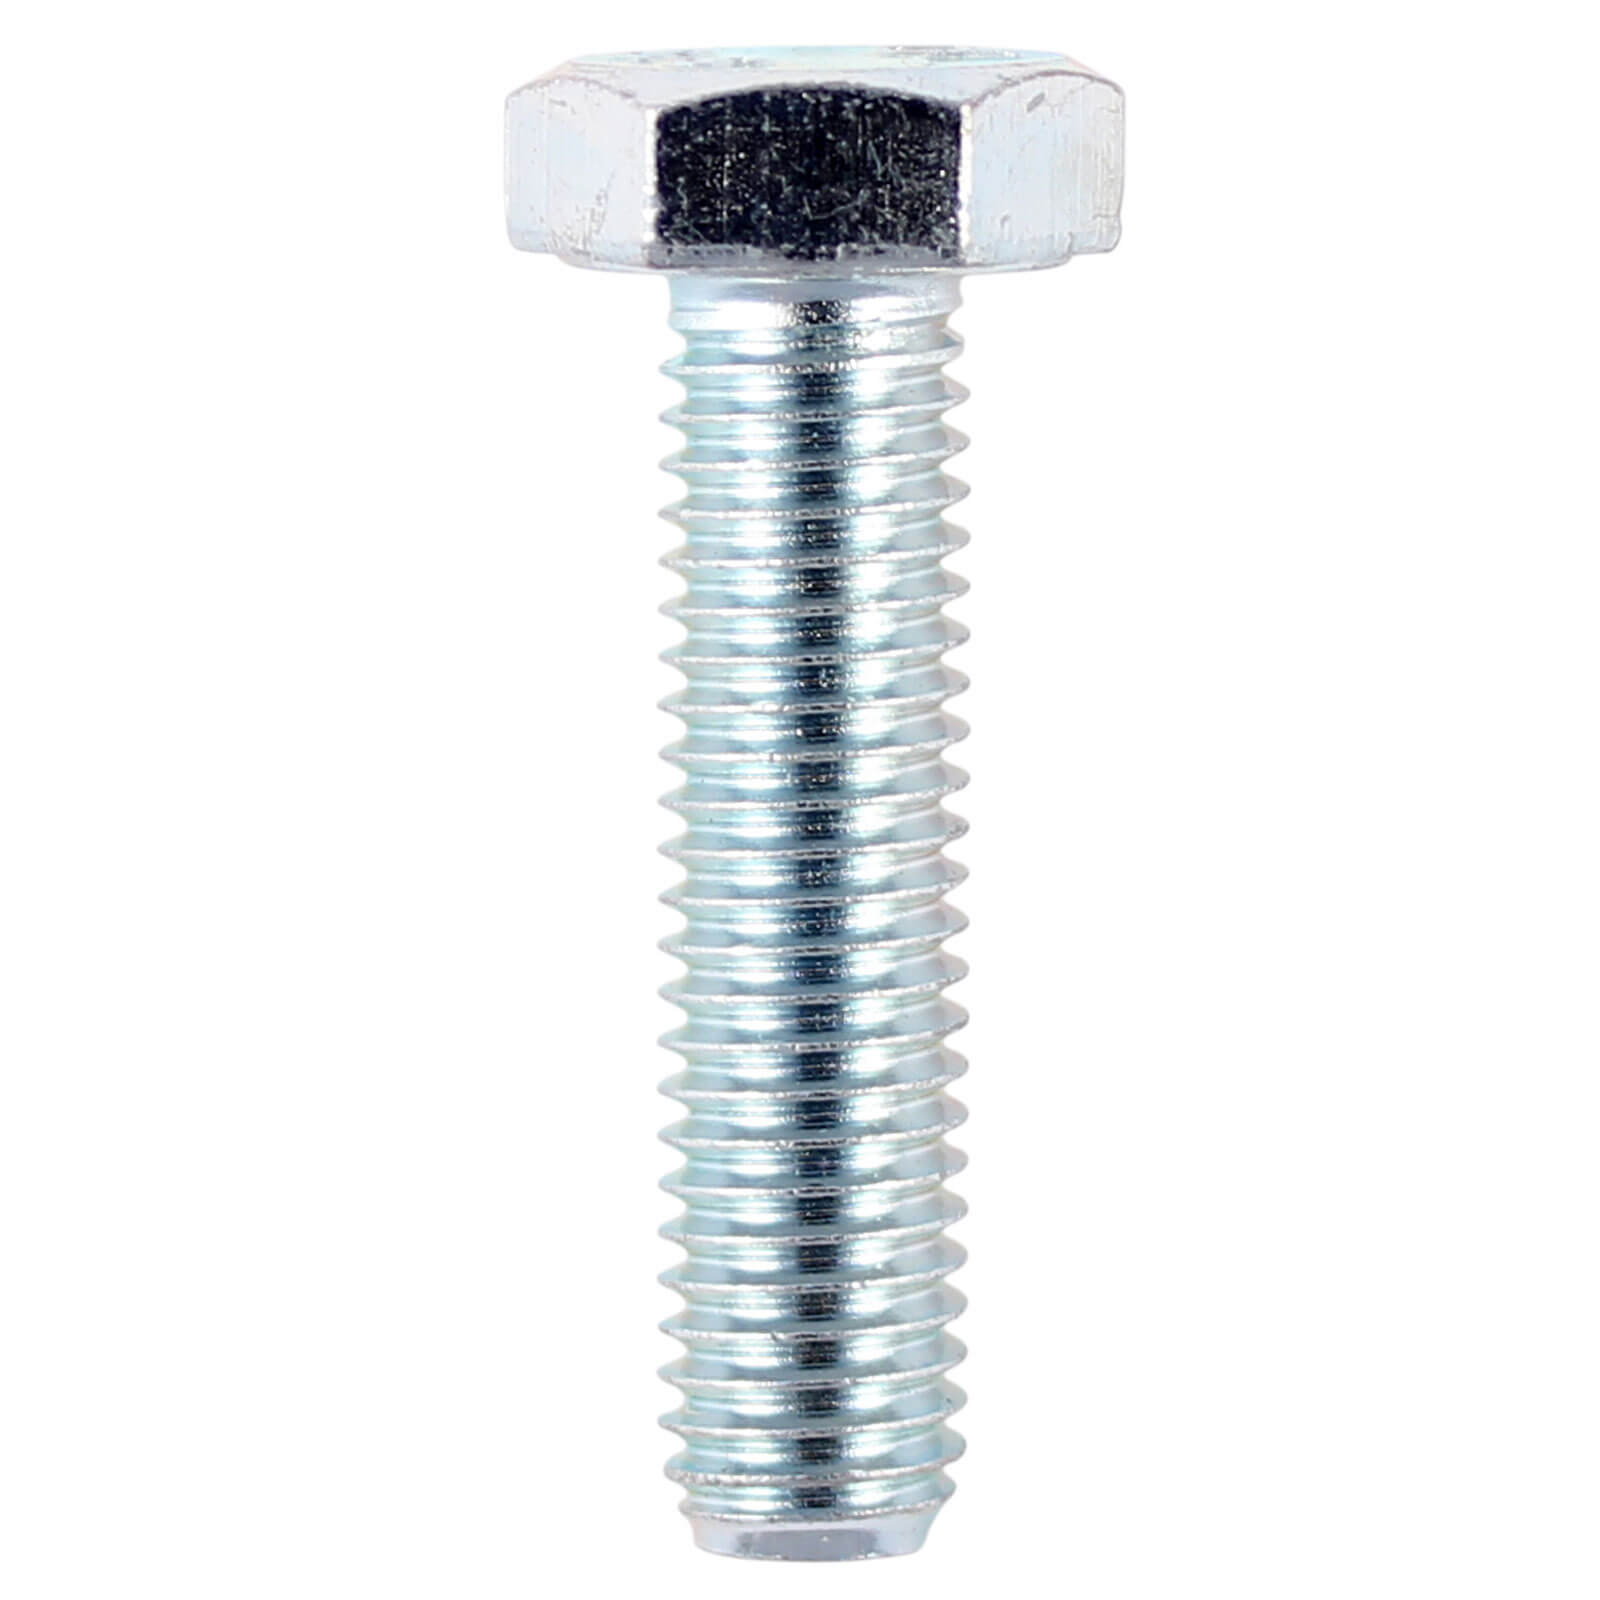 Image of Hexagon High Tensile Set Screw Zinc Plated M10 20mm Pack of 200